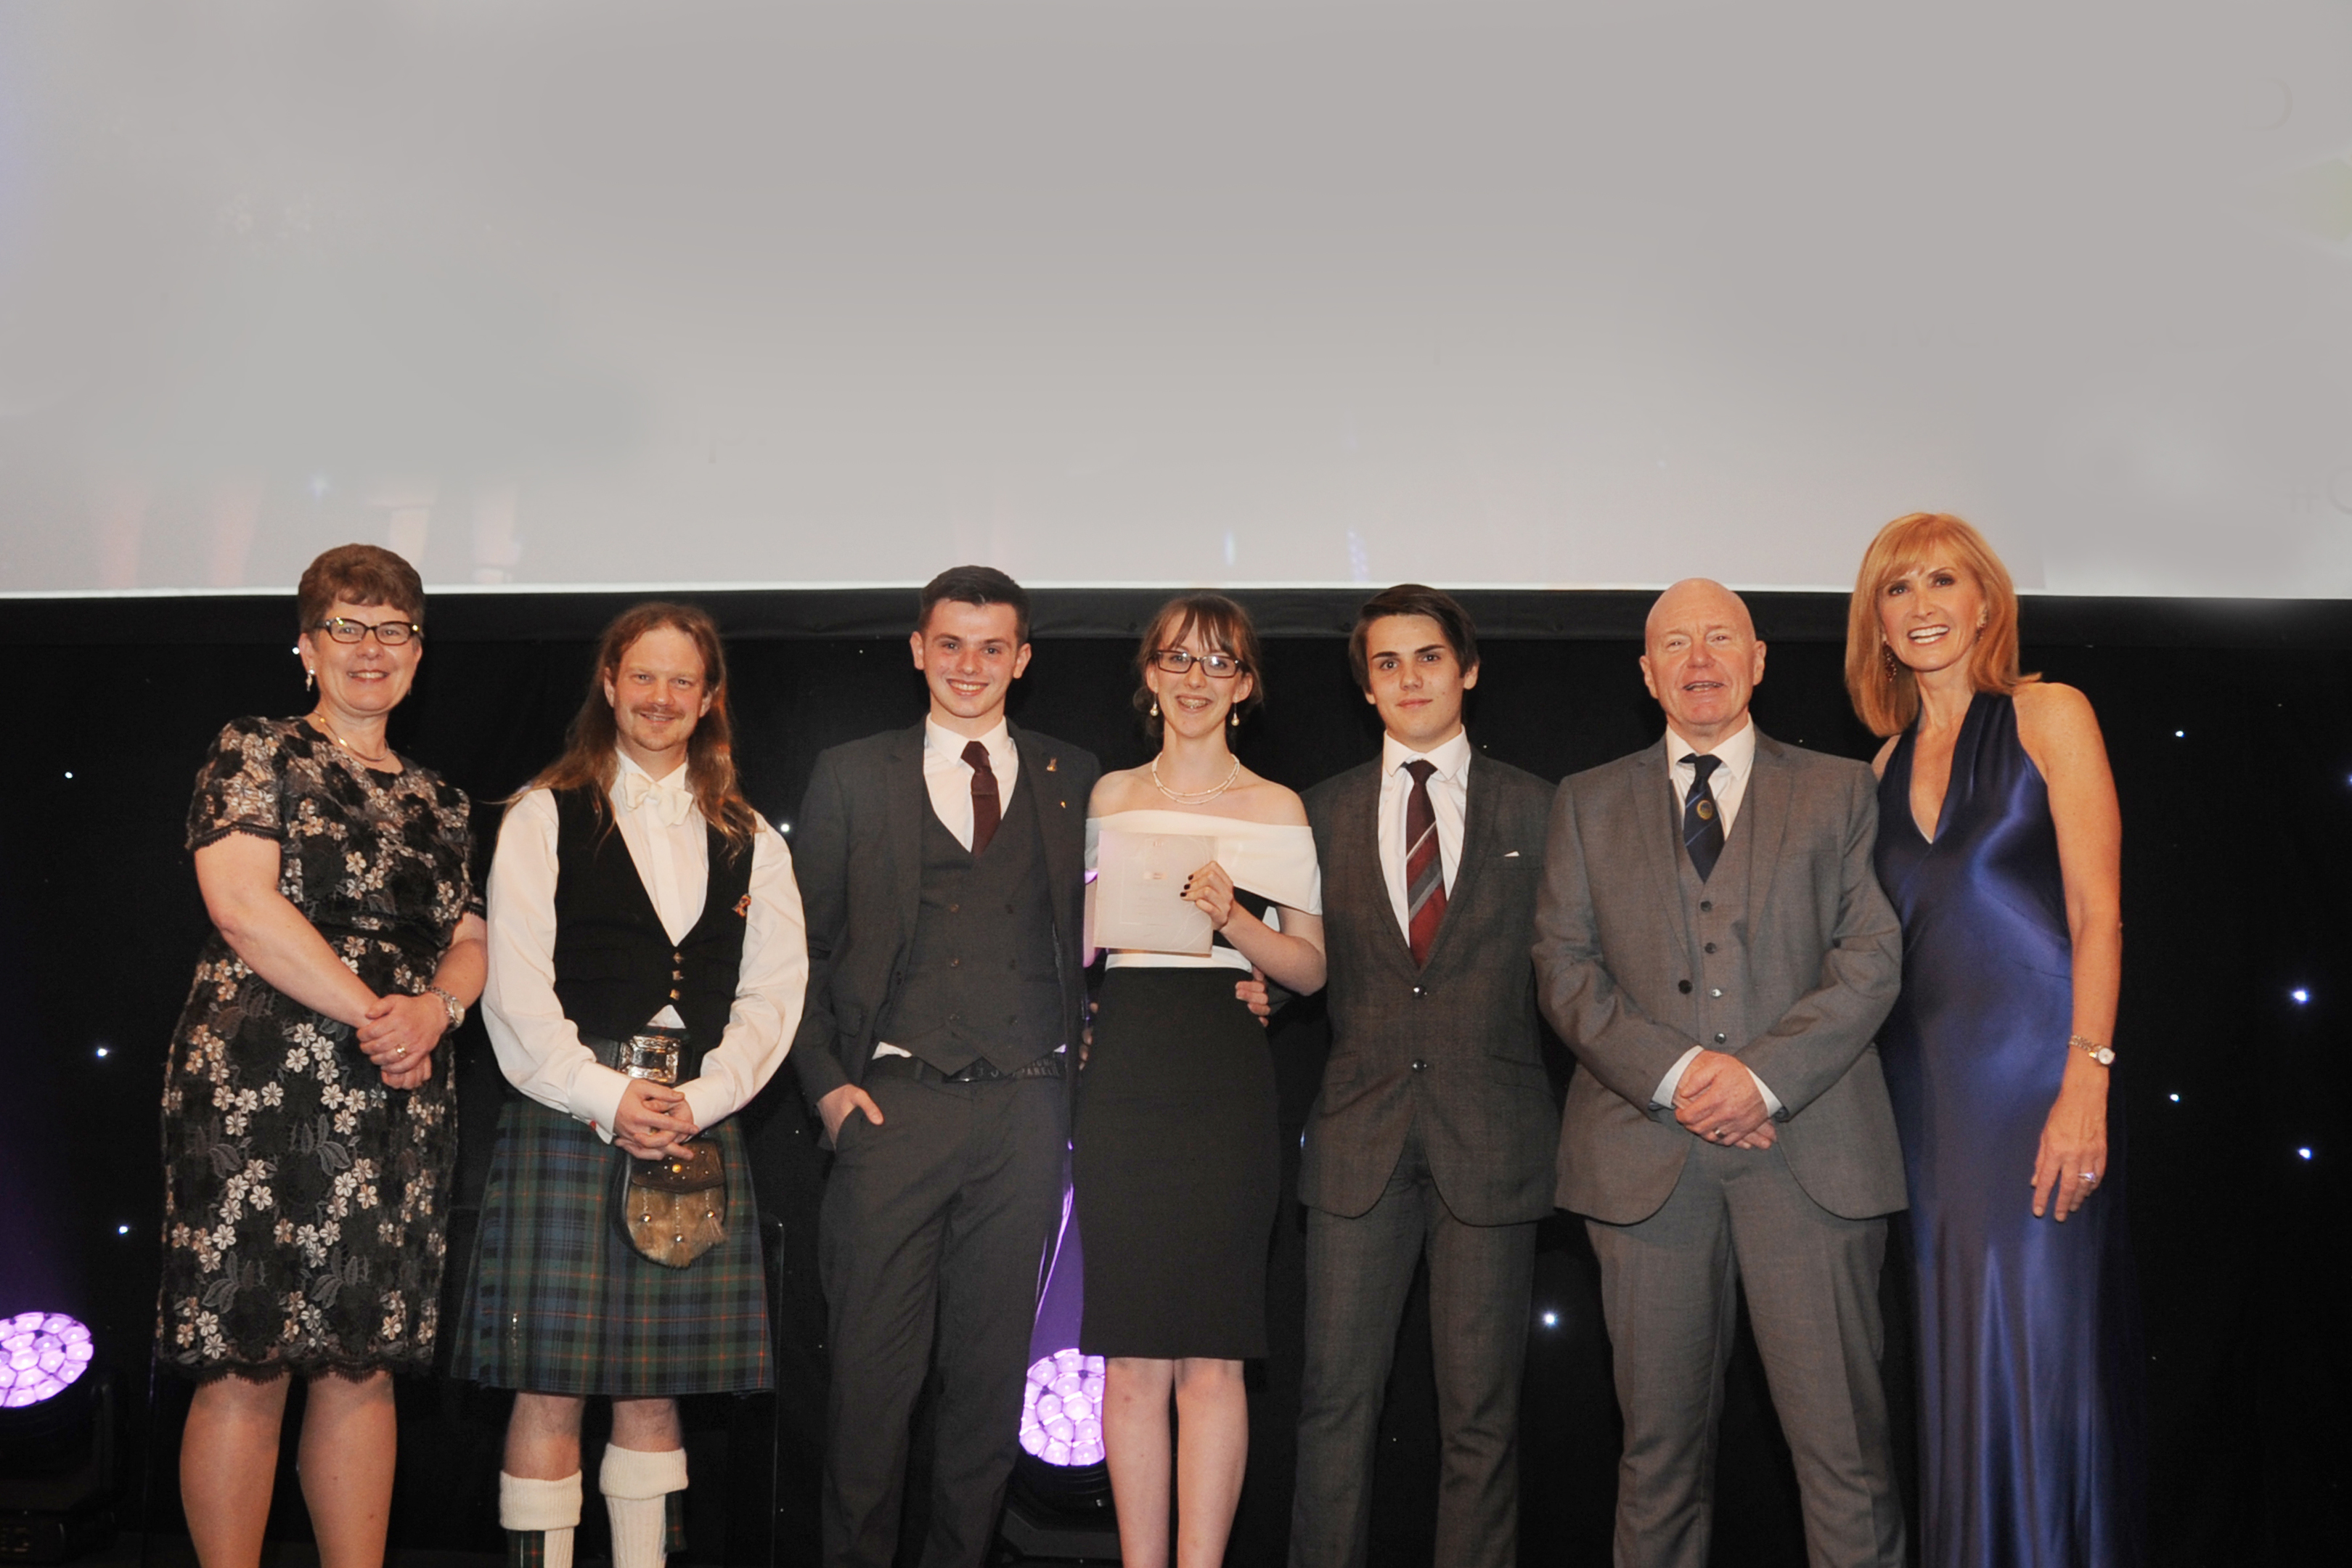 Staff and pupils from Kirkcaldy High picked up the award at the Fairmont St Andrews last week.